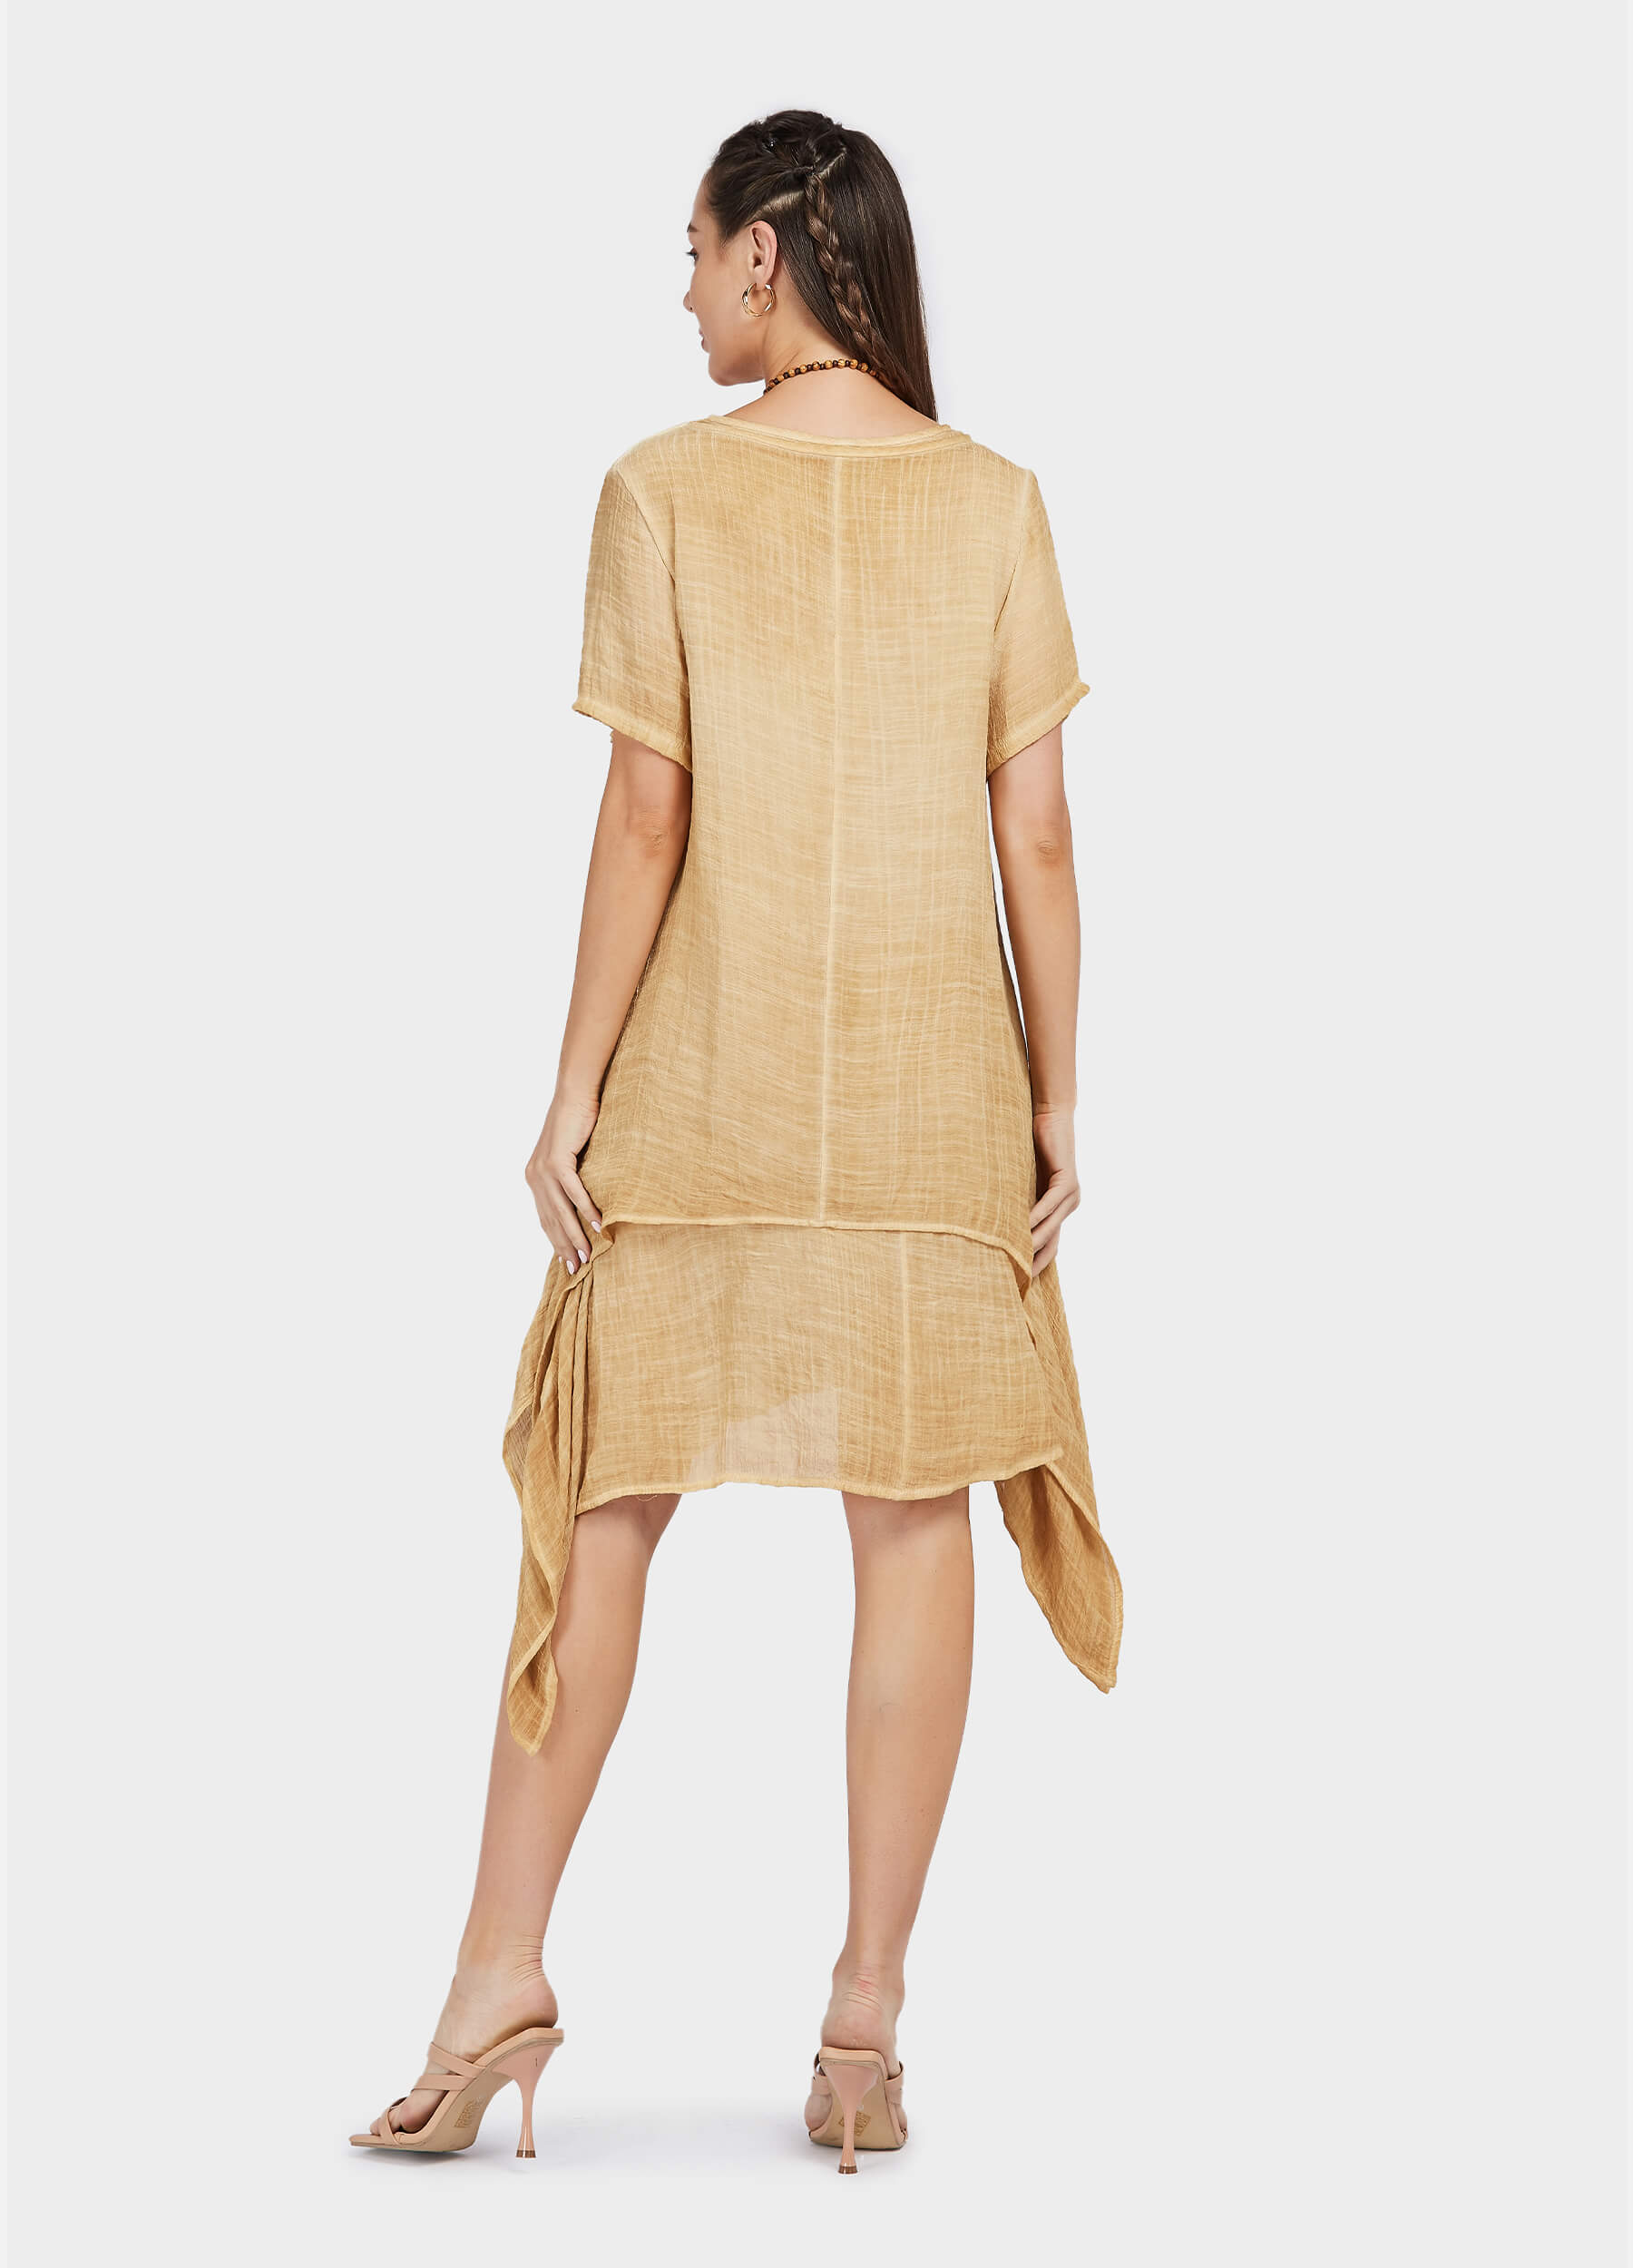 MECALA Women's Linen Scoop Neck Short Sleeve Dress with Wooden Elephant Necklace-Yellow back view